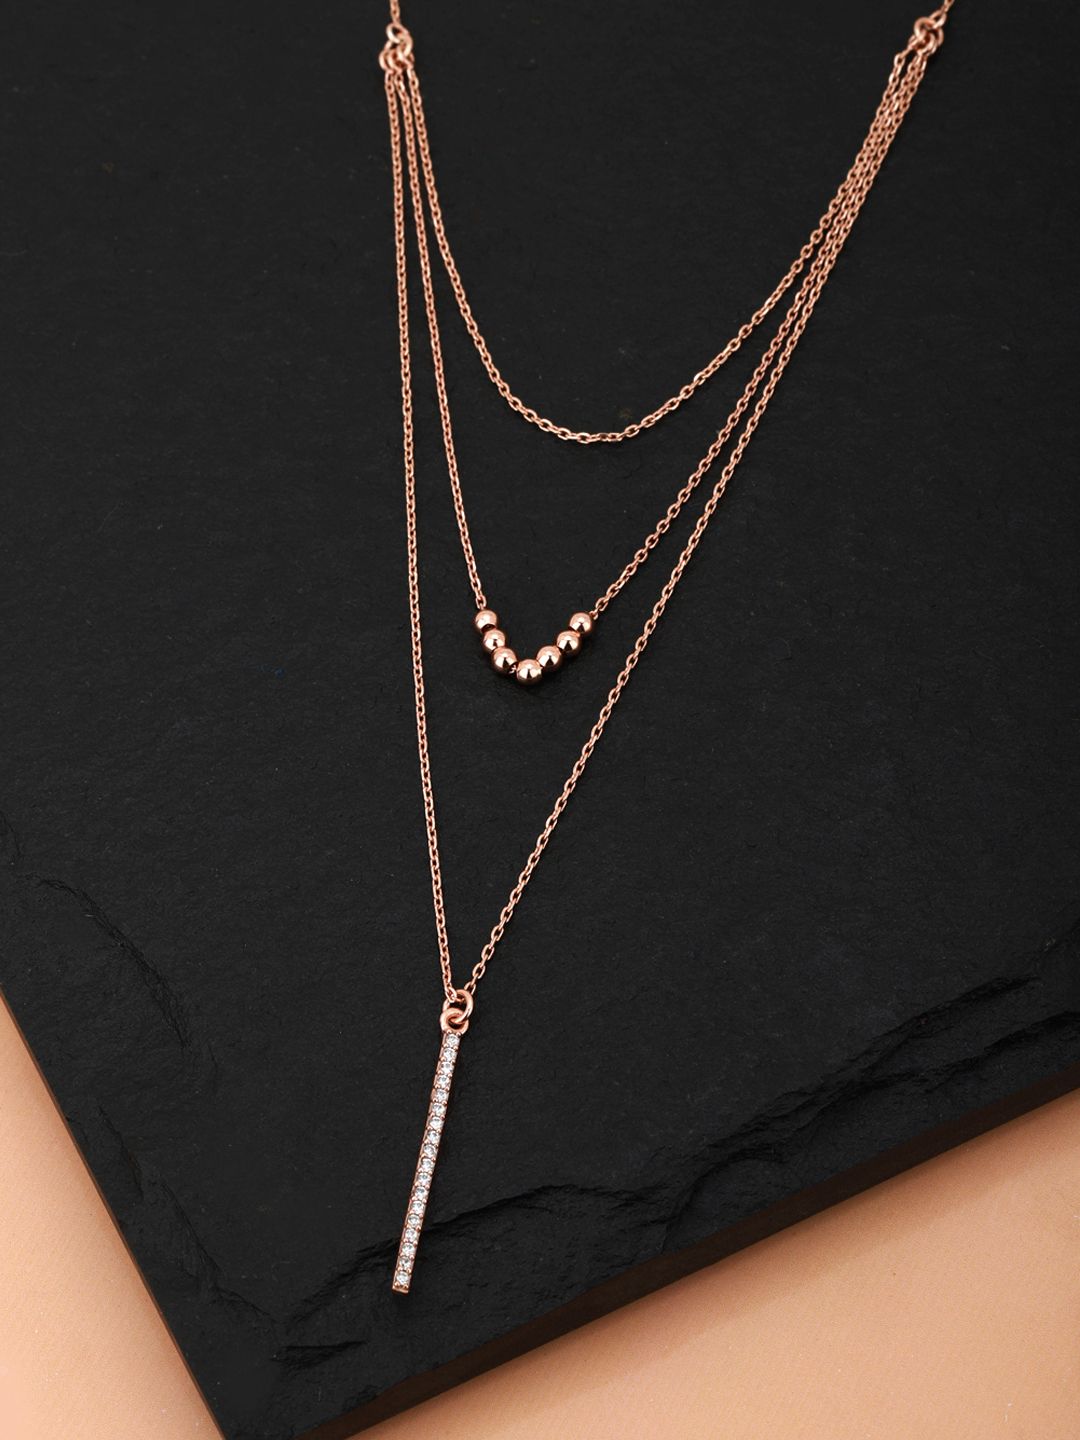 Carlton London Rose Gold-Plated Layered Lariat Necklace Price in India